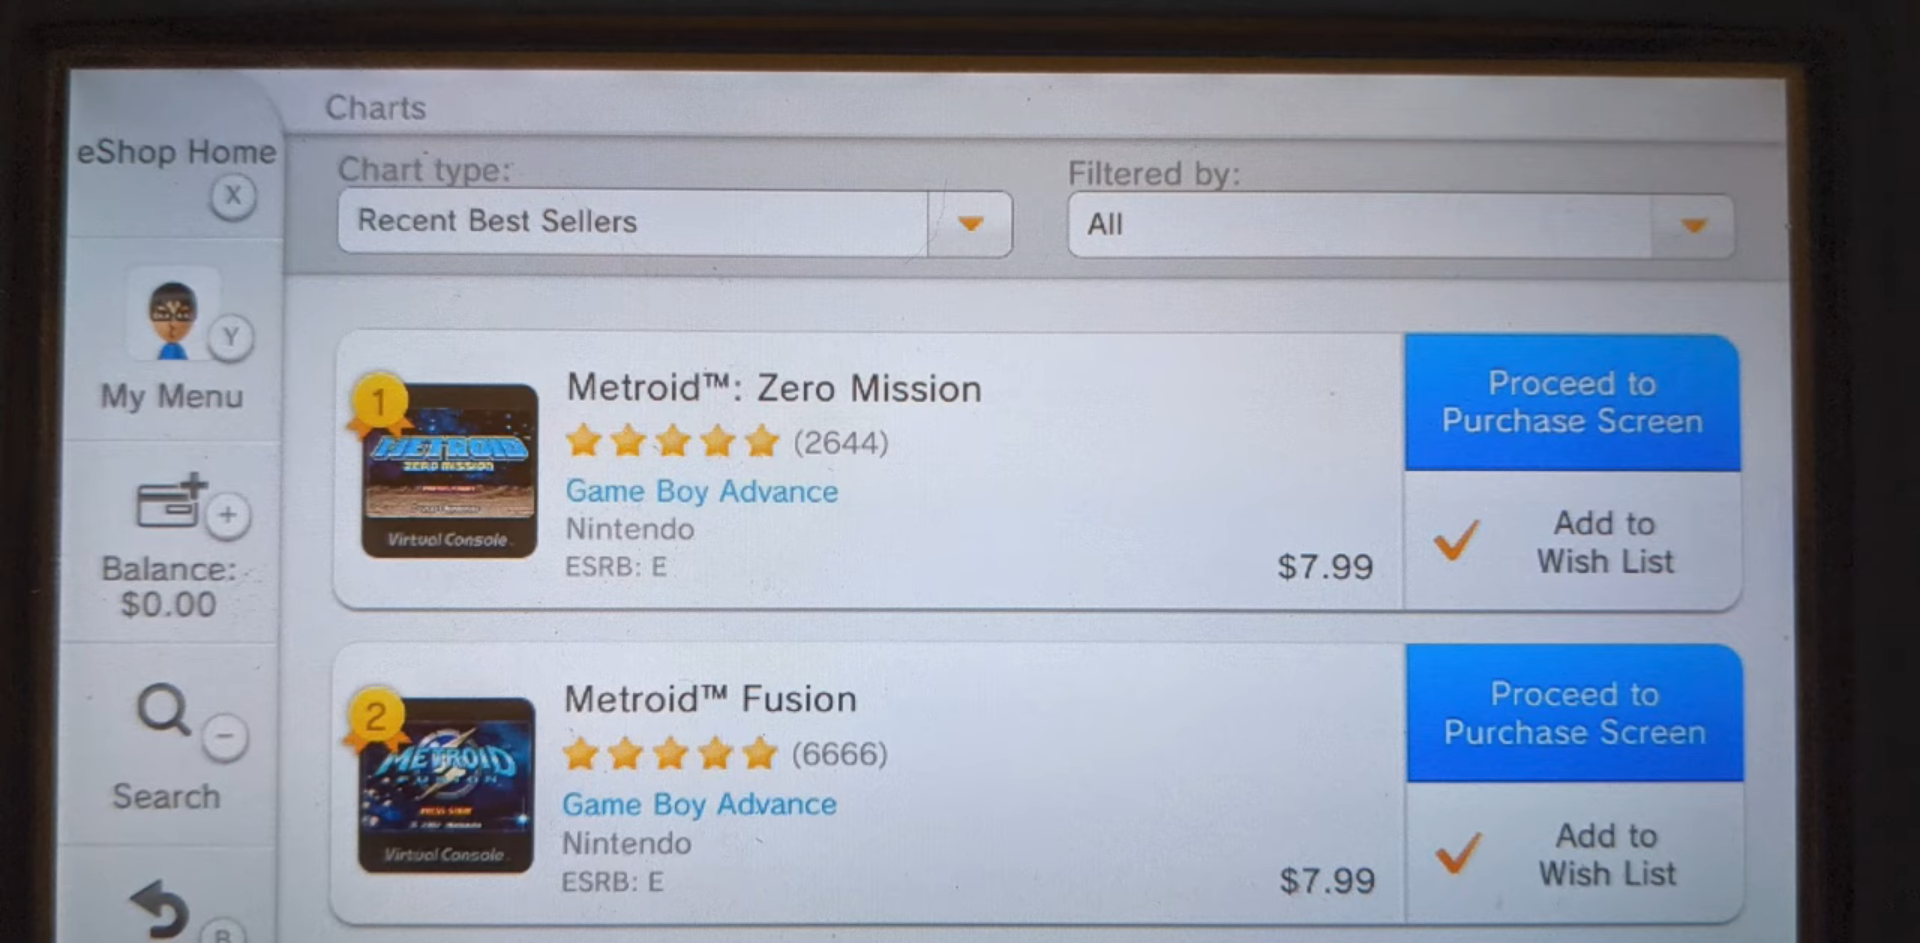 Blur Potatoes pot The Metroid series rises to the top on the Wii U Virtual Console sales  charts